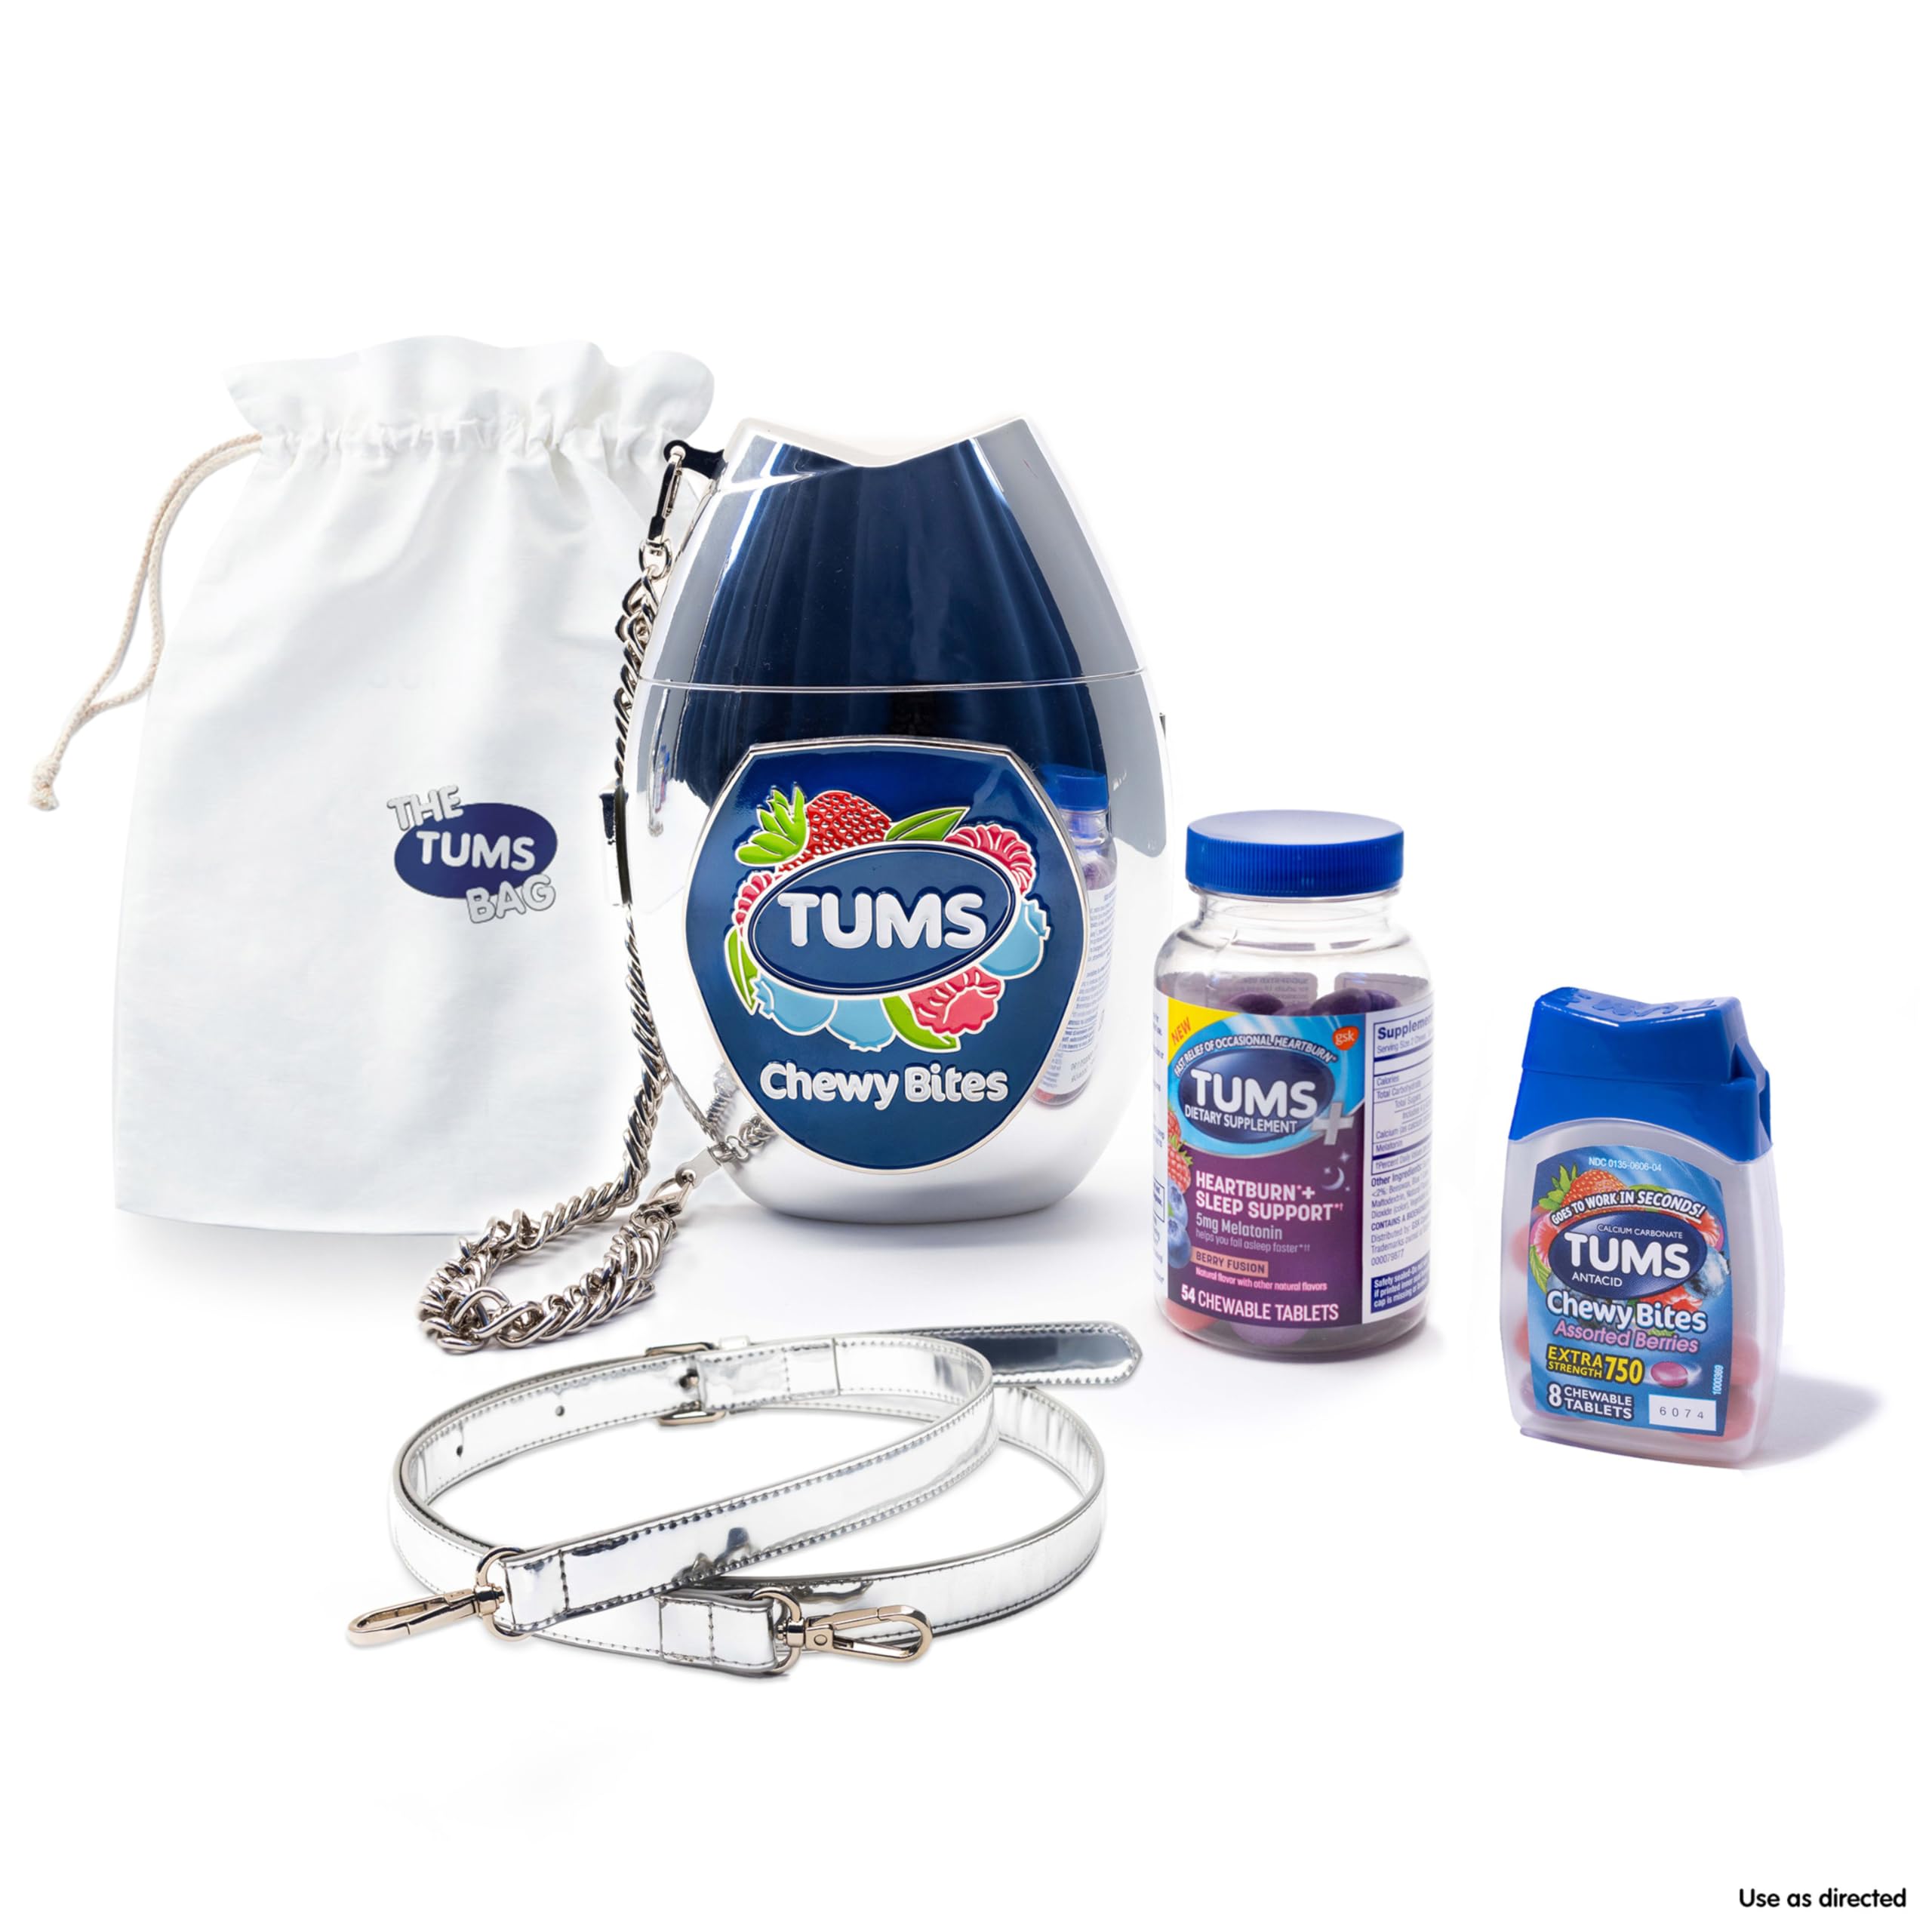 TUMS Limited Edition Bag by Nik Bentel